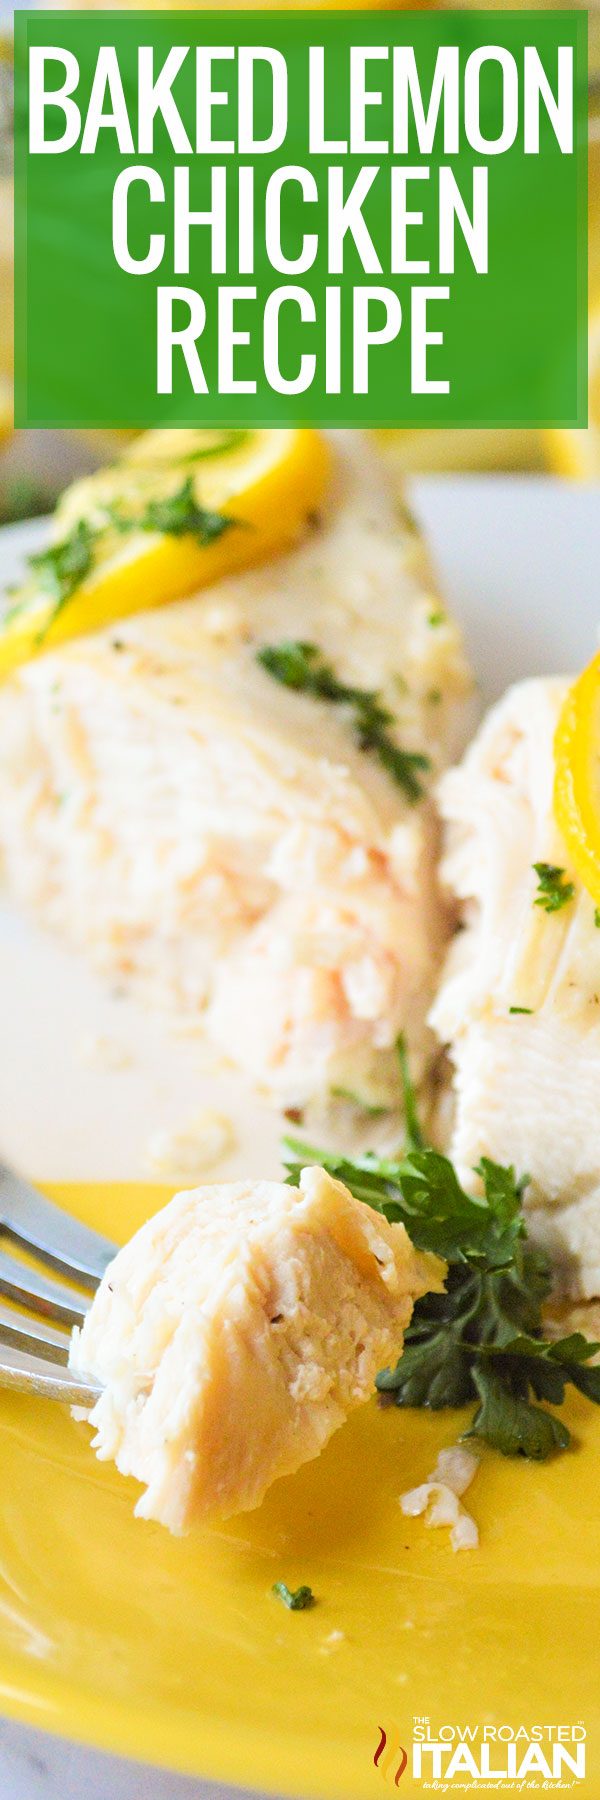 titled image (and shown): baked lemon chicken recipe